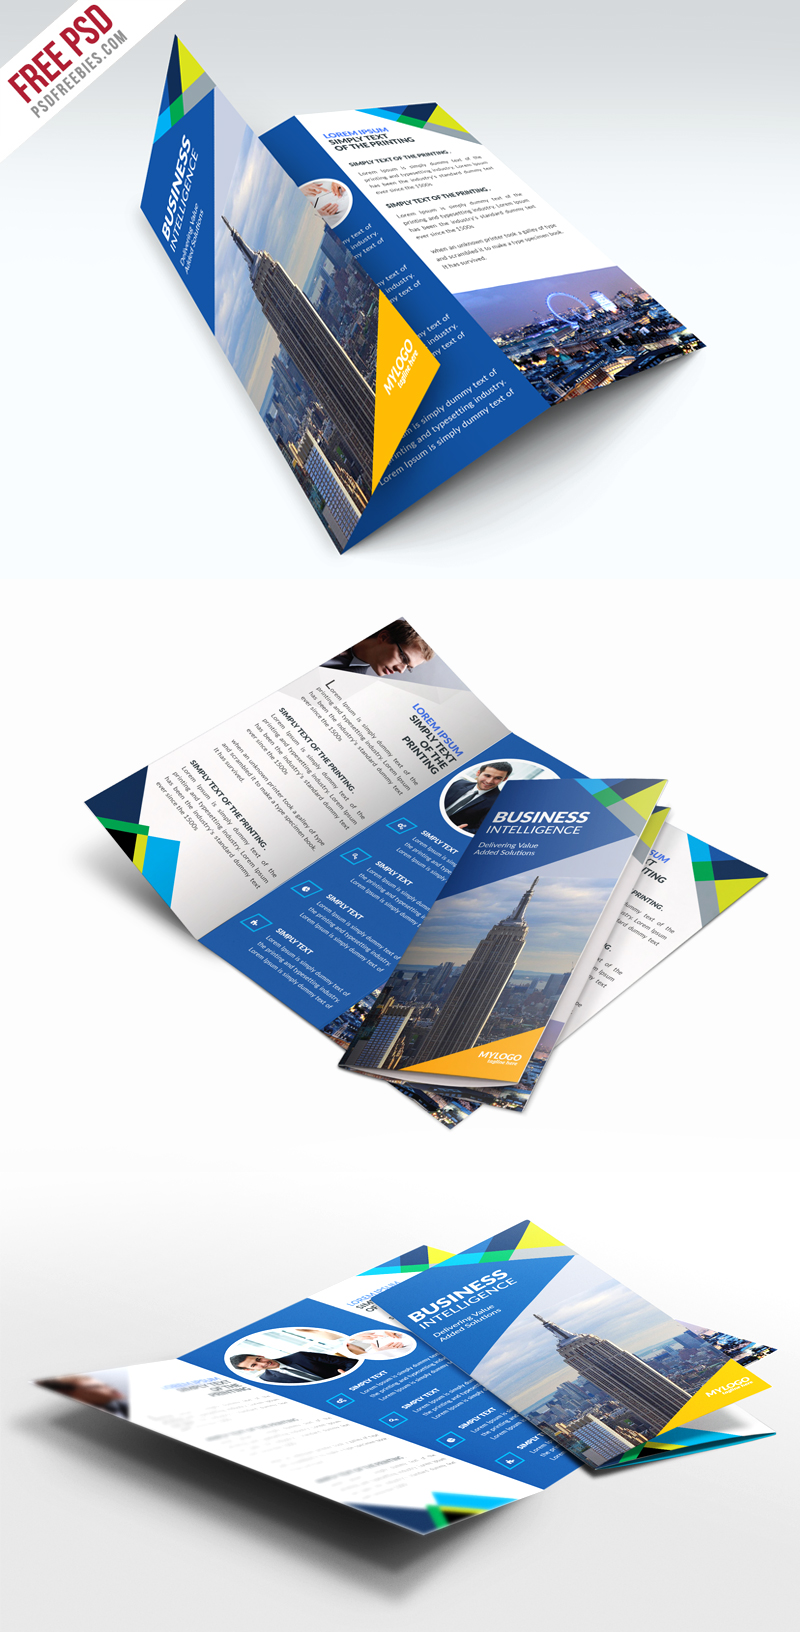 Business TriFold Brochure PSD Free Download